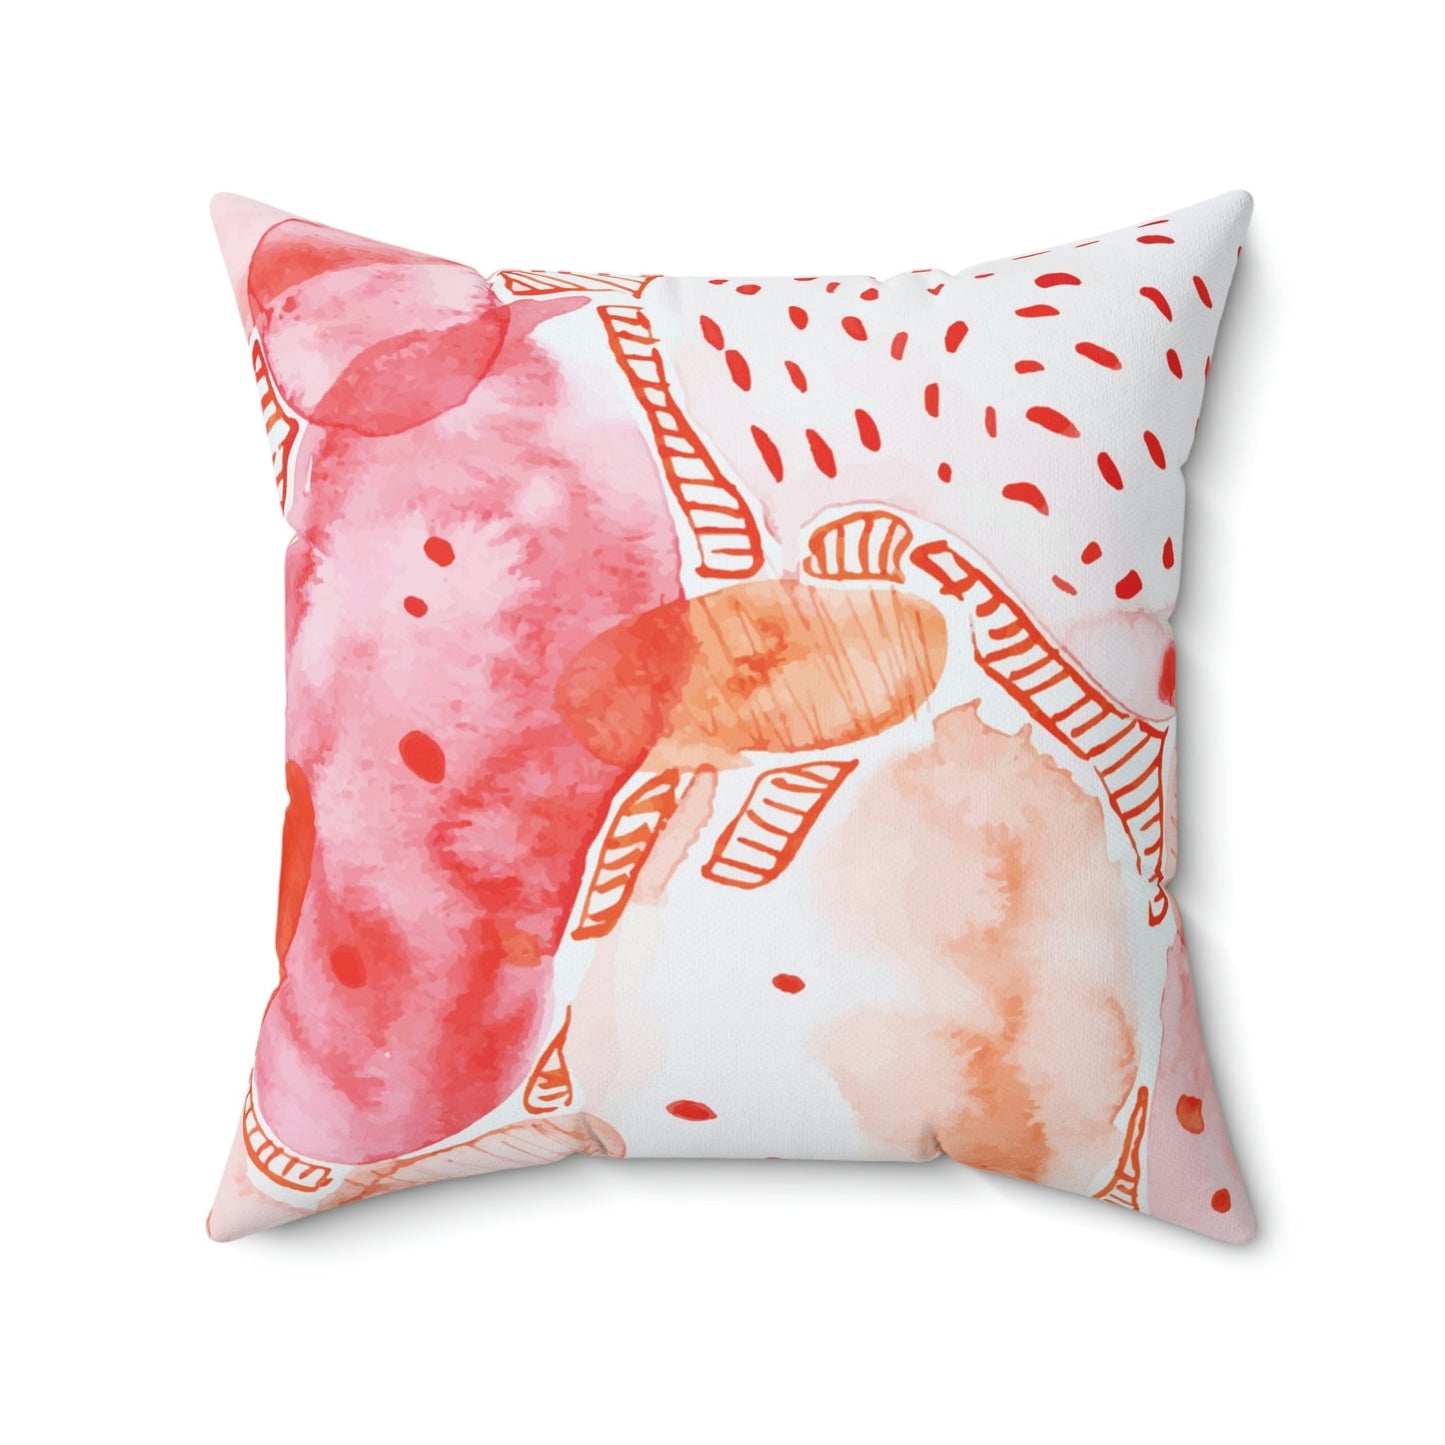 Smashed Strawberries Square Pillow Home Decor Pink Sweetheart